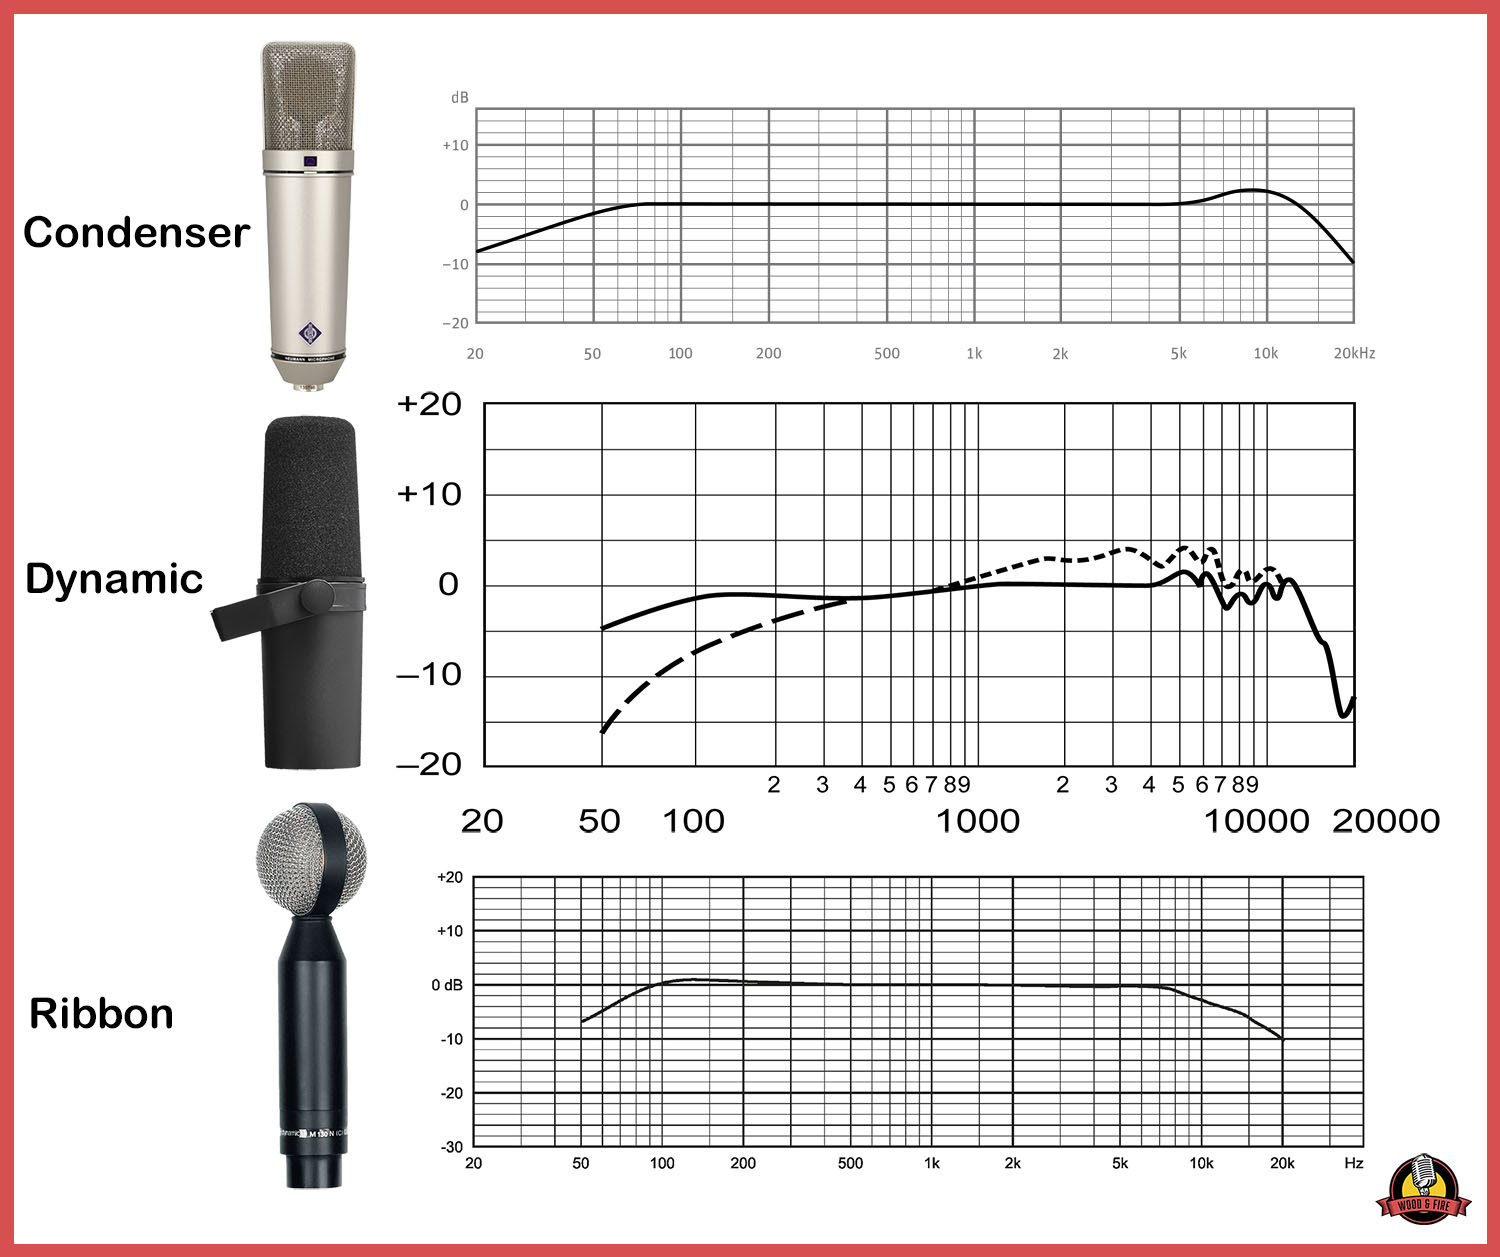 Comparison of frequency response curves of each microphone type with popular models in each class